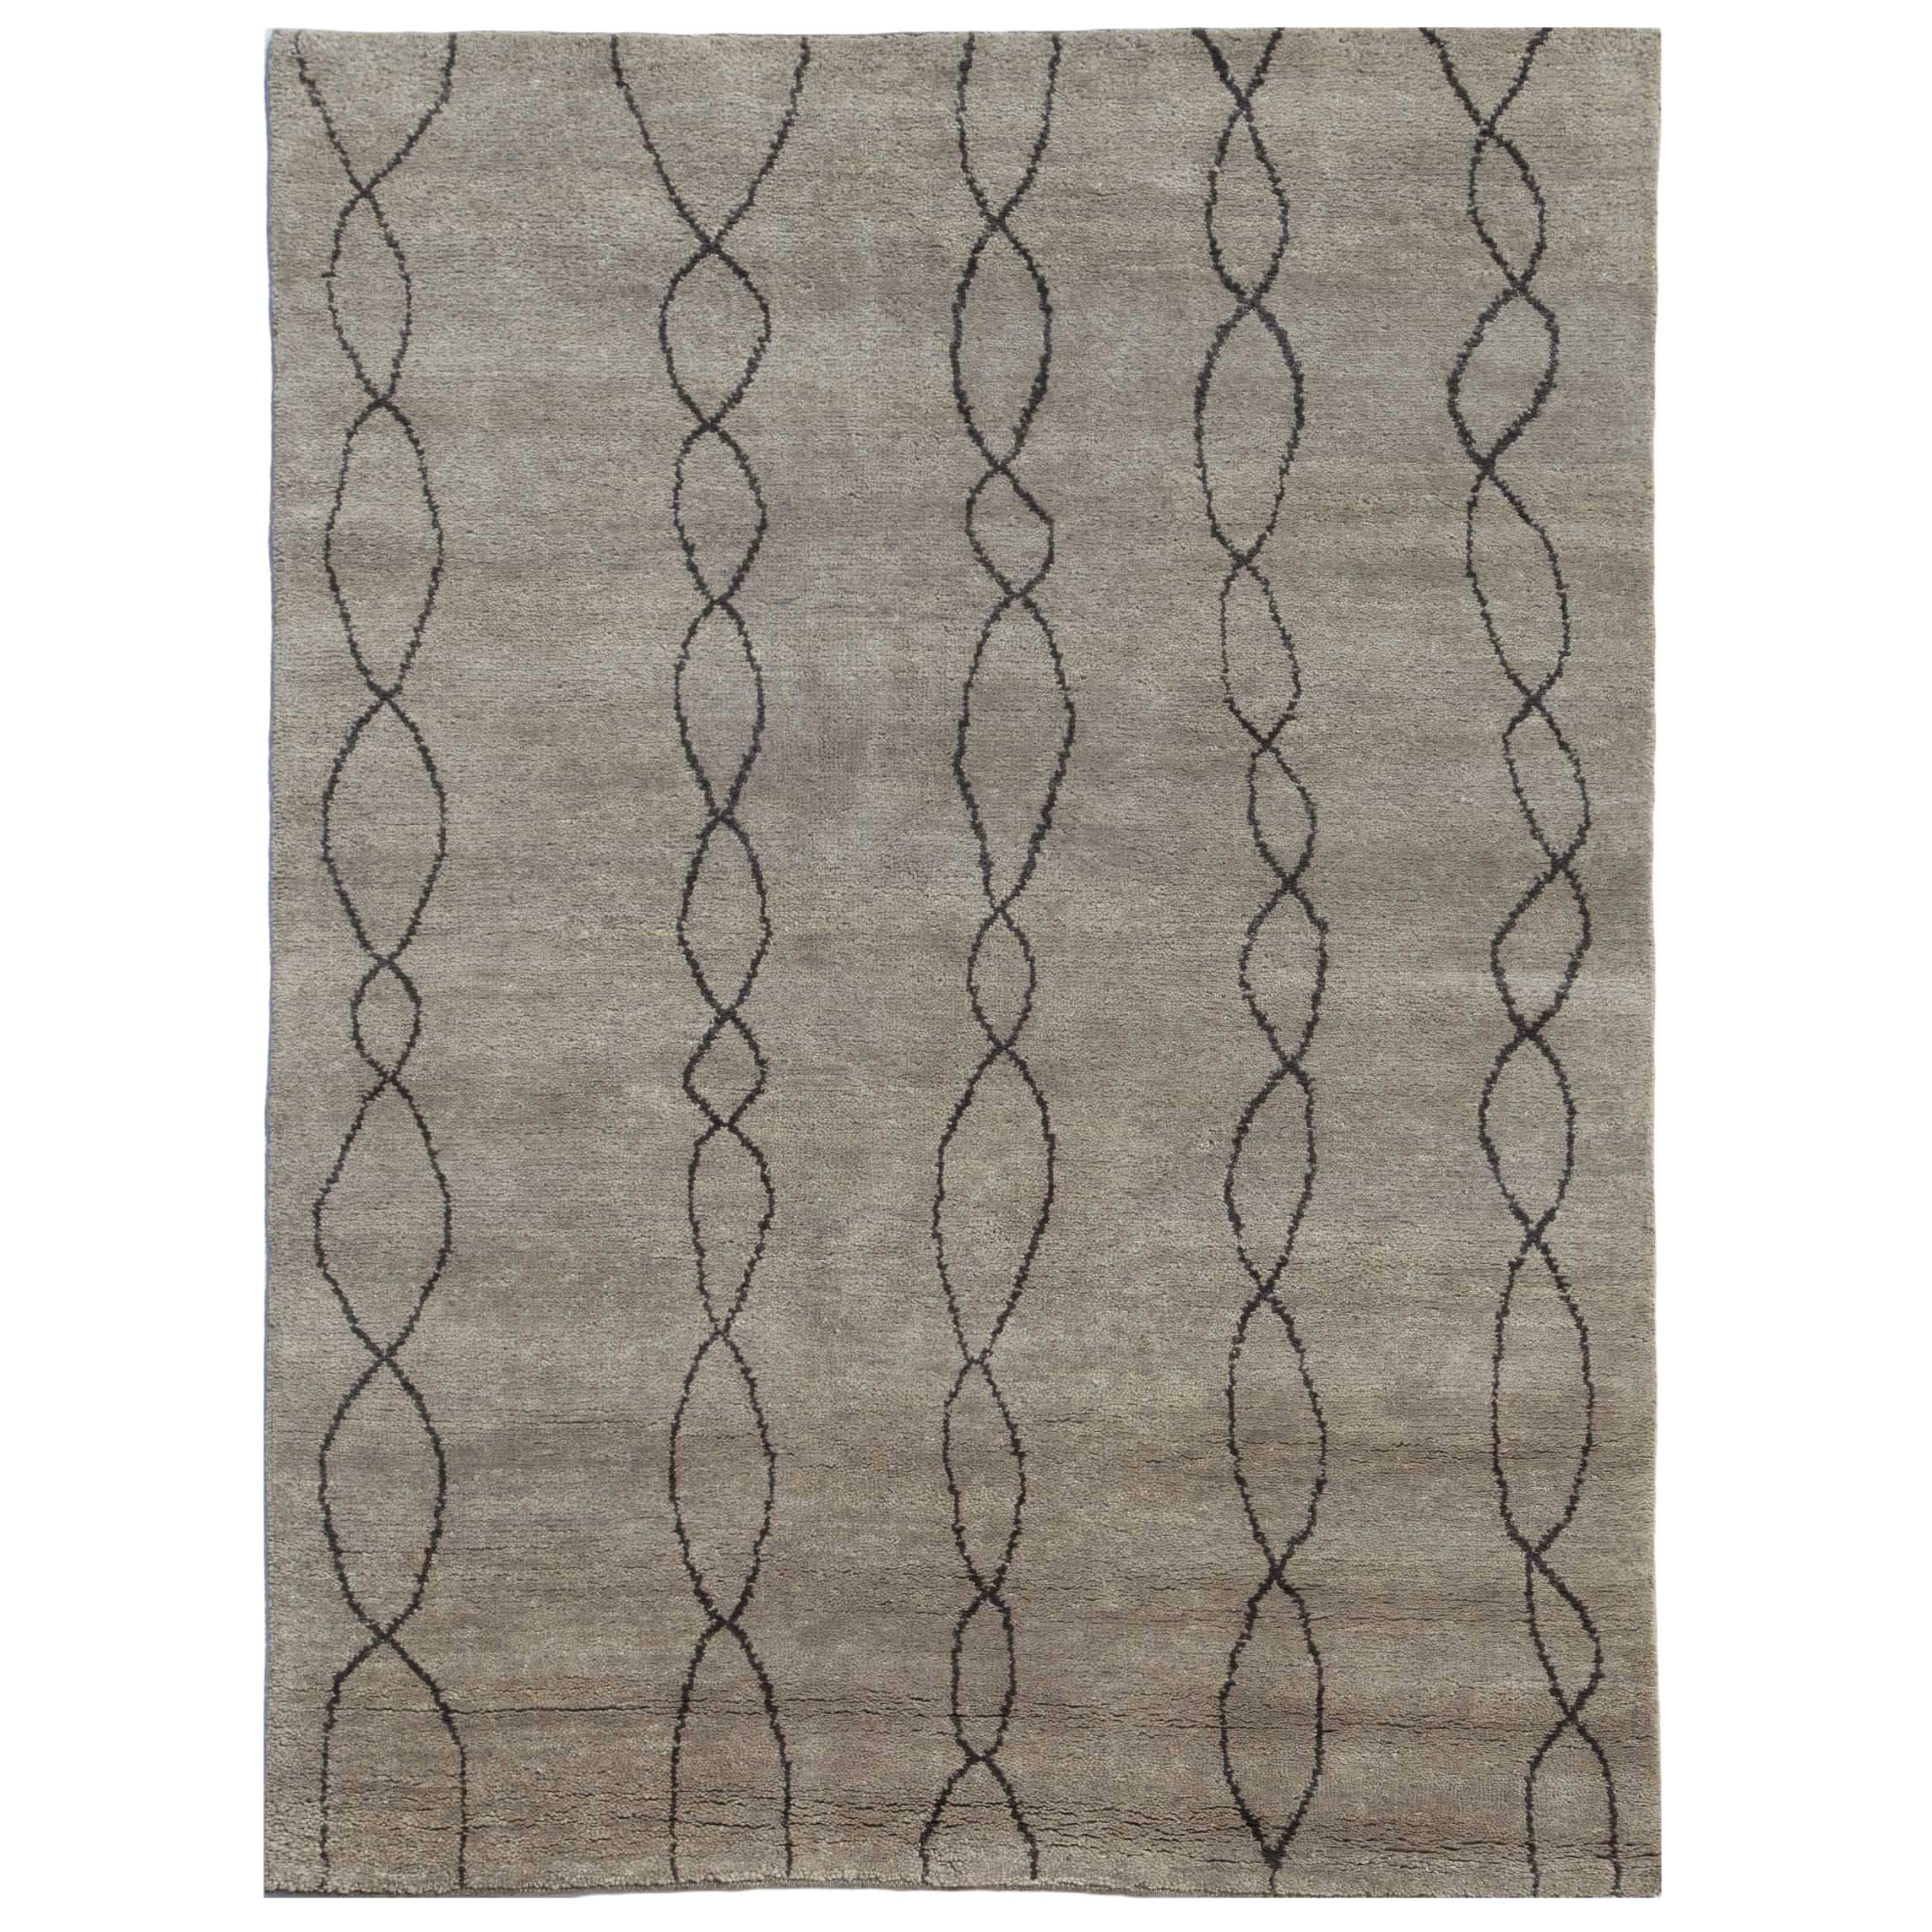 Hand knotted Grey/ Black Southwestern/tribal Pattern Wool Contemporary Rug (5 X 8)